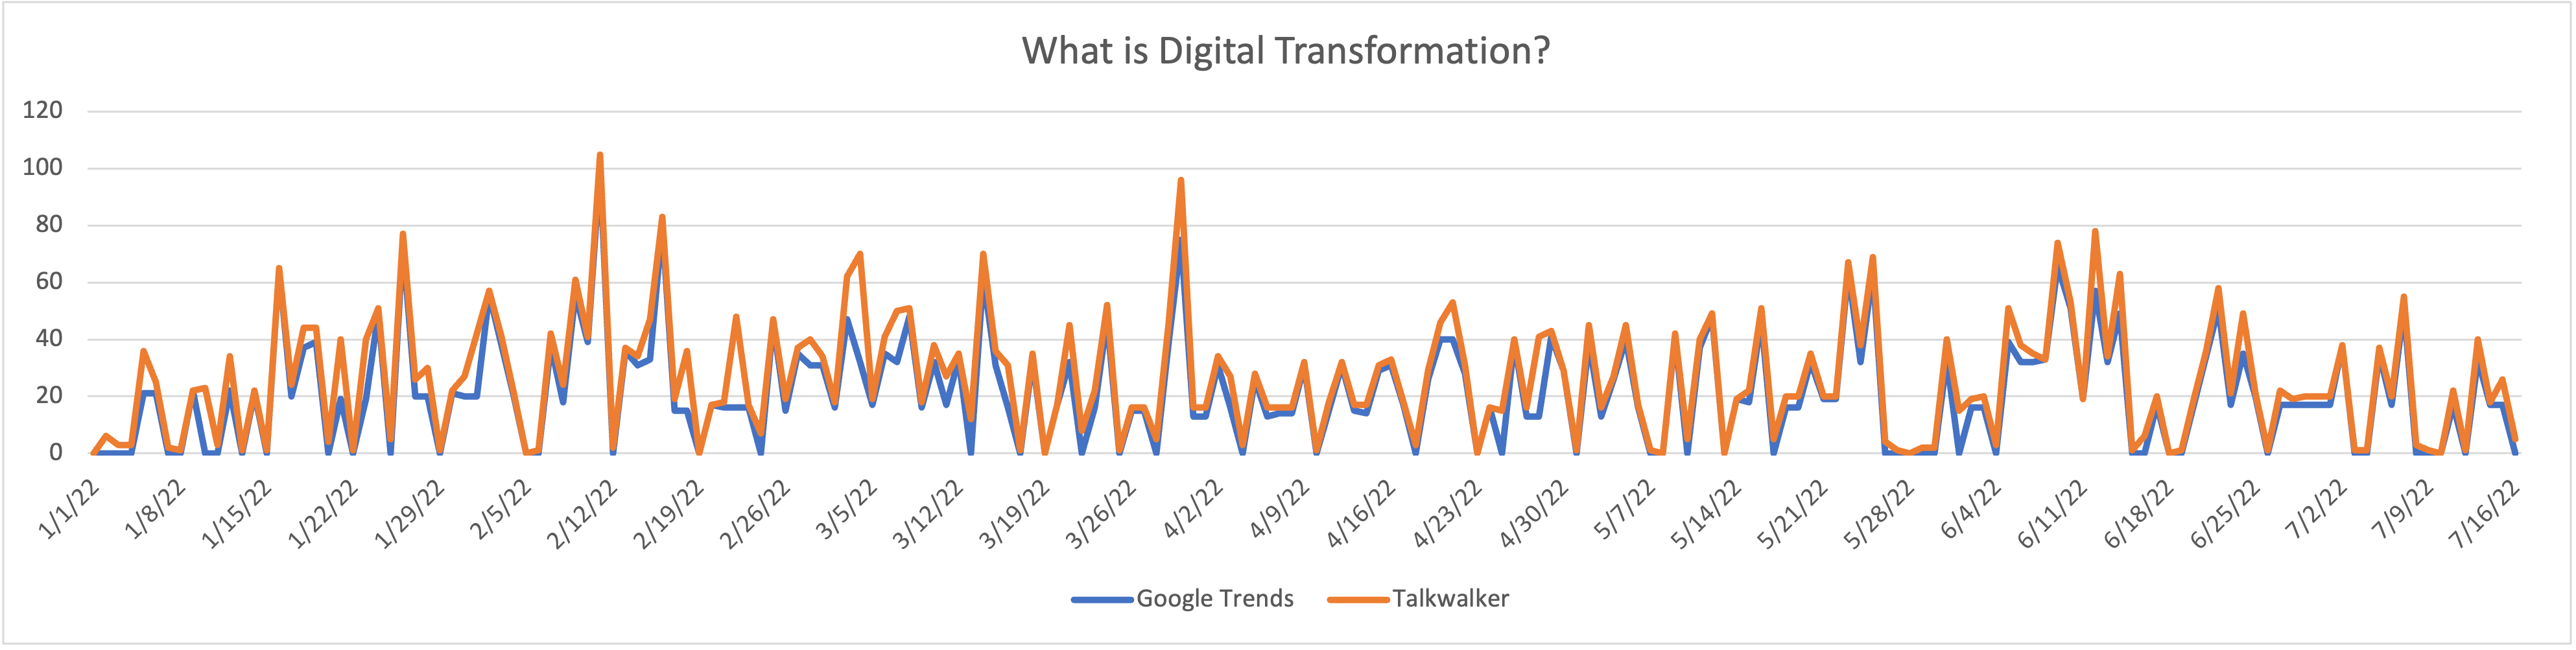 What is digital transformation 1